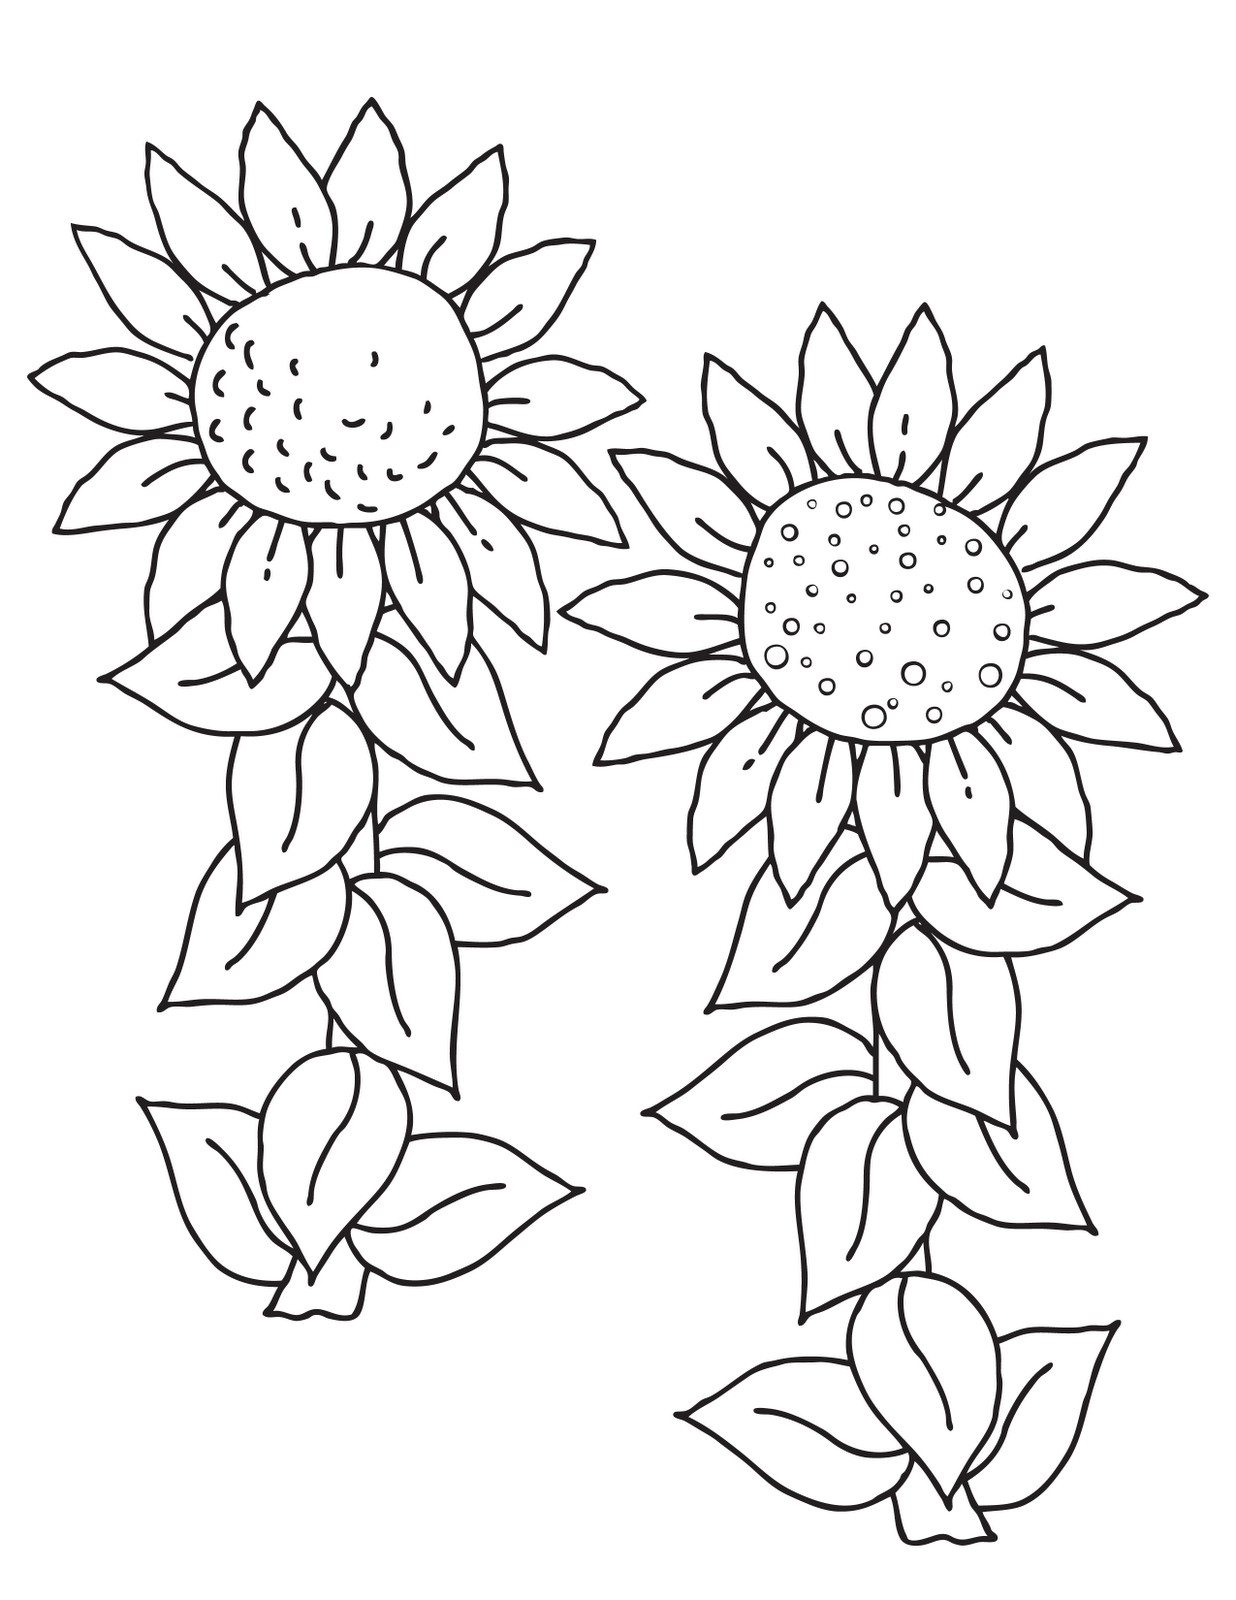 Sunflower Coloring Pages Printable
 Daisies Digis and Doodads Free Digi Stamps